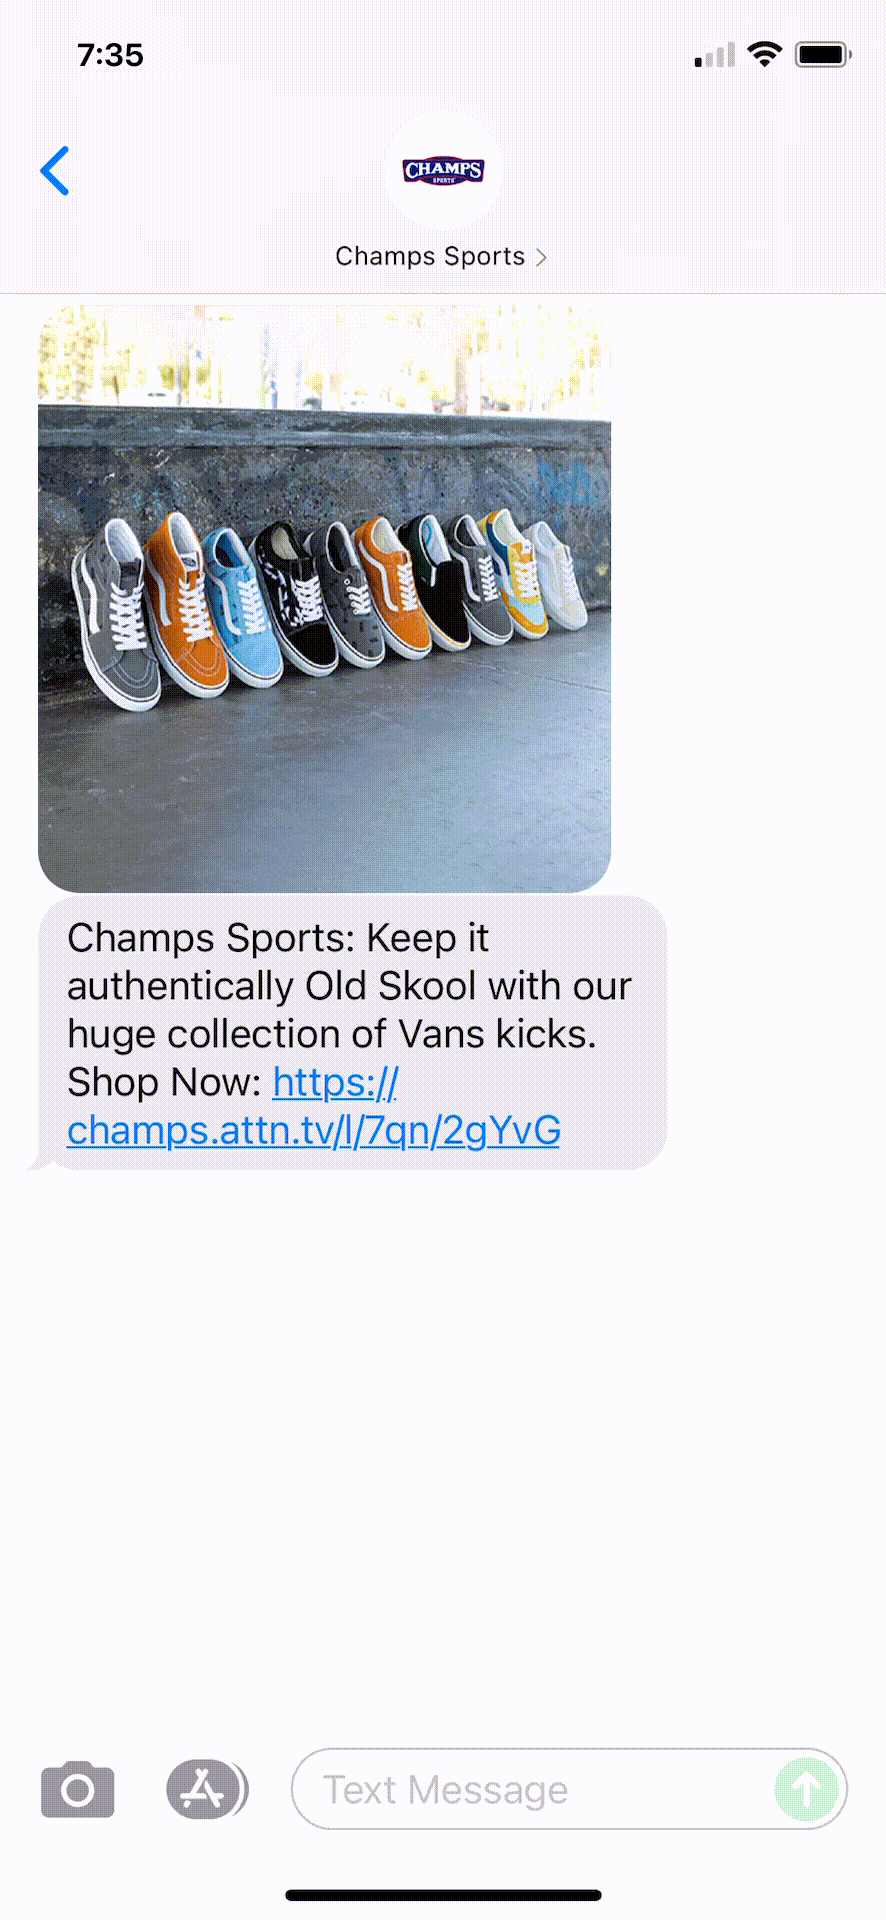 Champs-Sports-Text-Message-Marketing-Example-09.11.2021